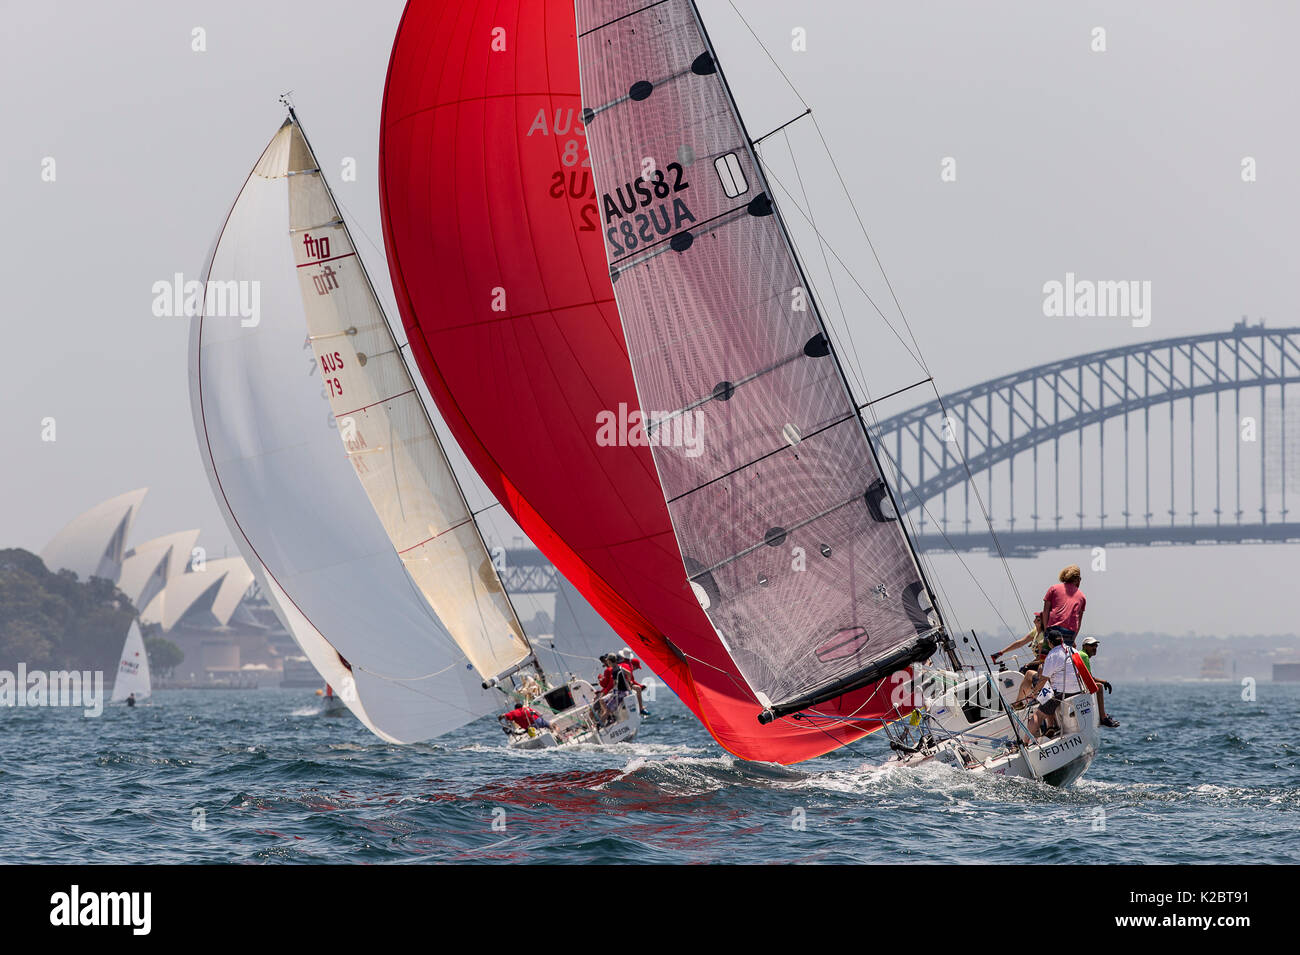 Sailboats with spinnakers out, racing in the Sydney Harbour, New South Wales, Australia, October 2012. All non-editorial uses must be cleared individually. Stock Photo